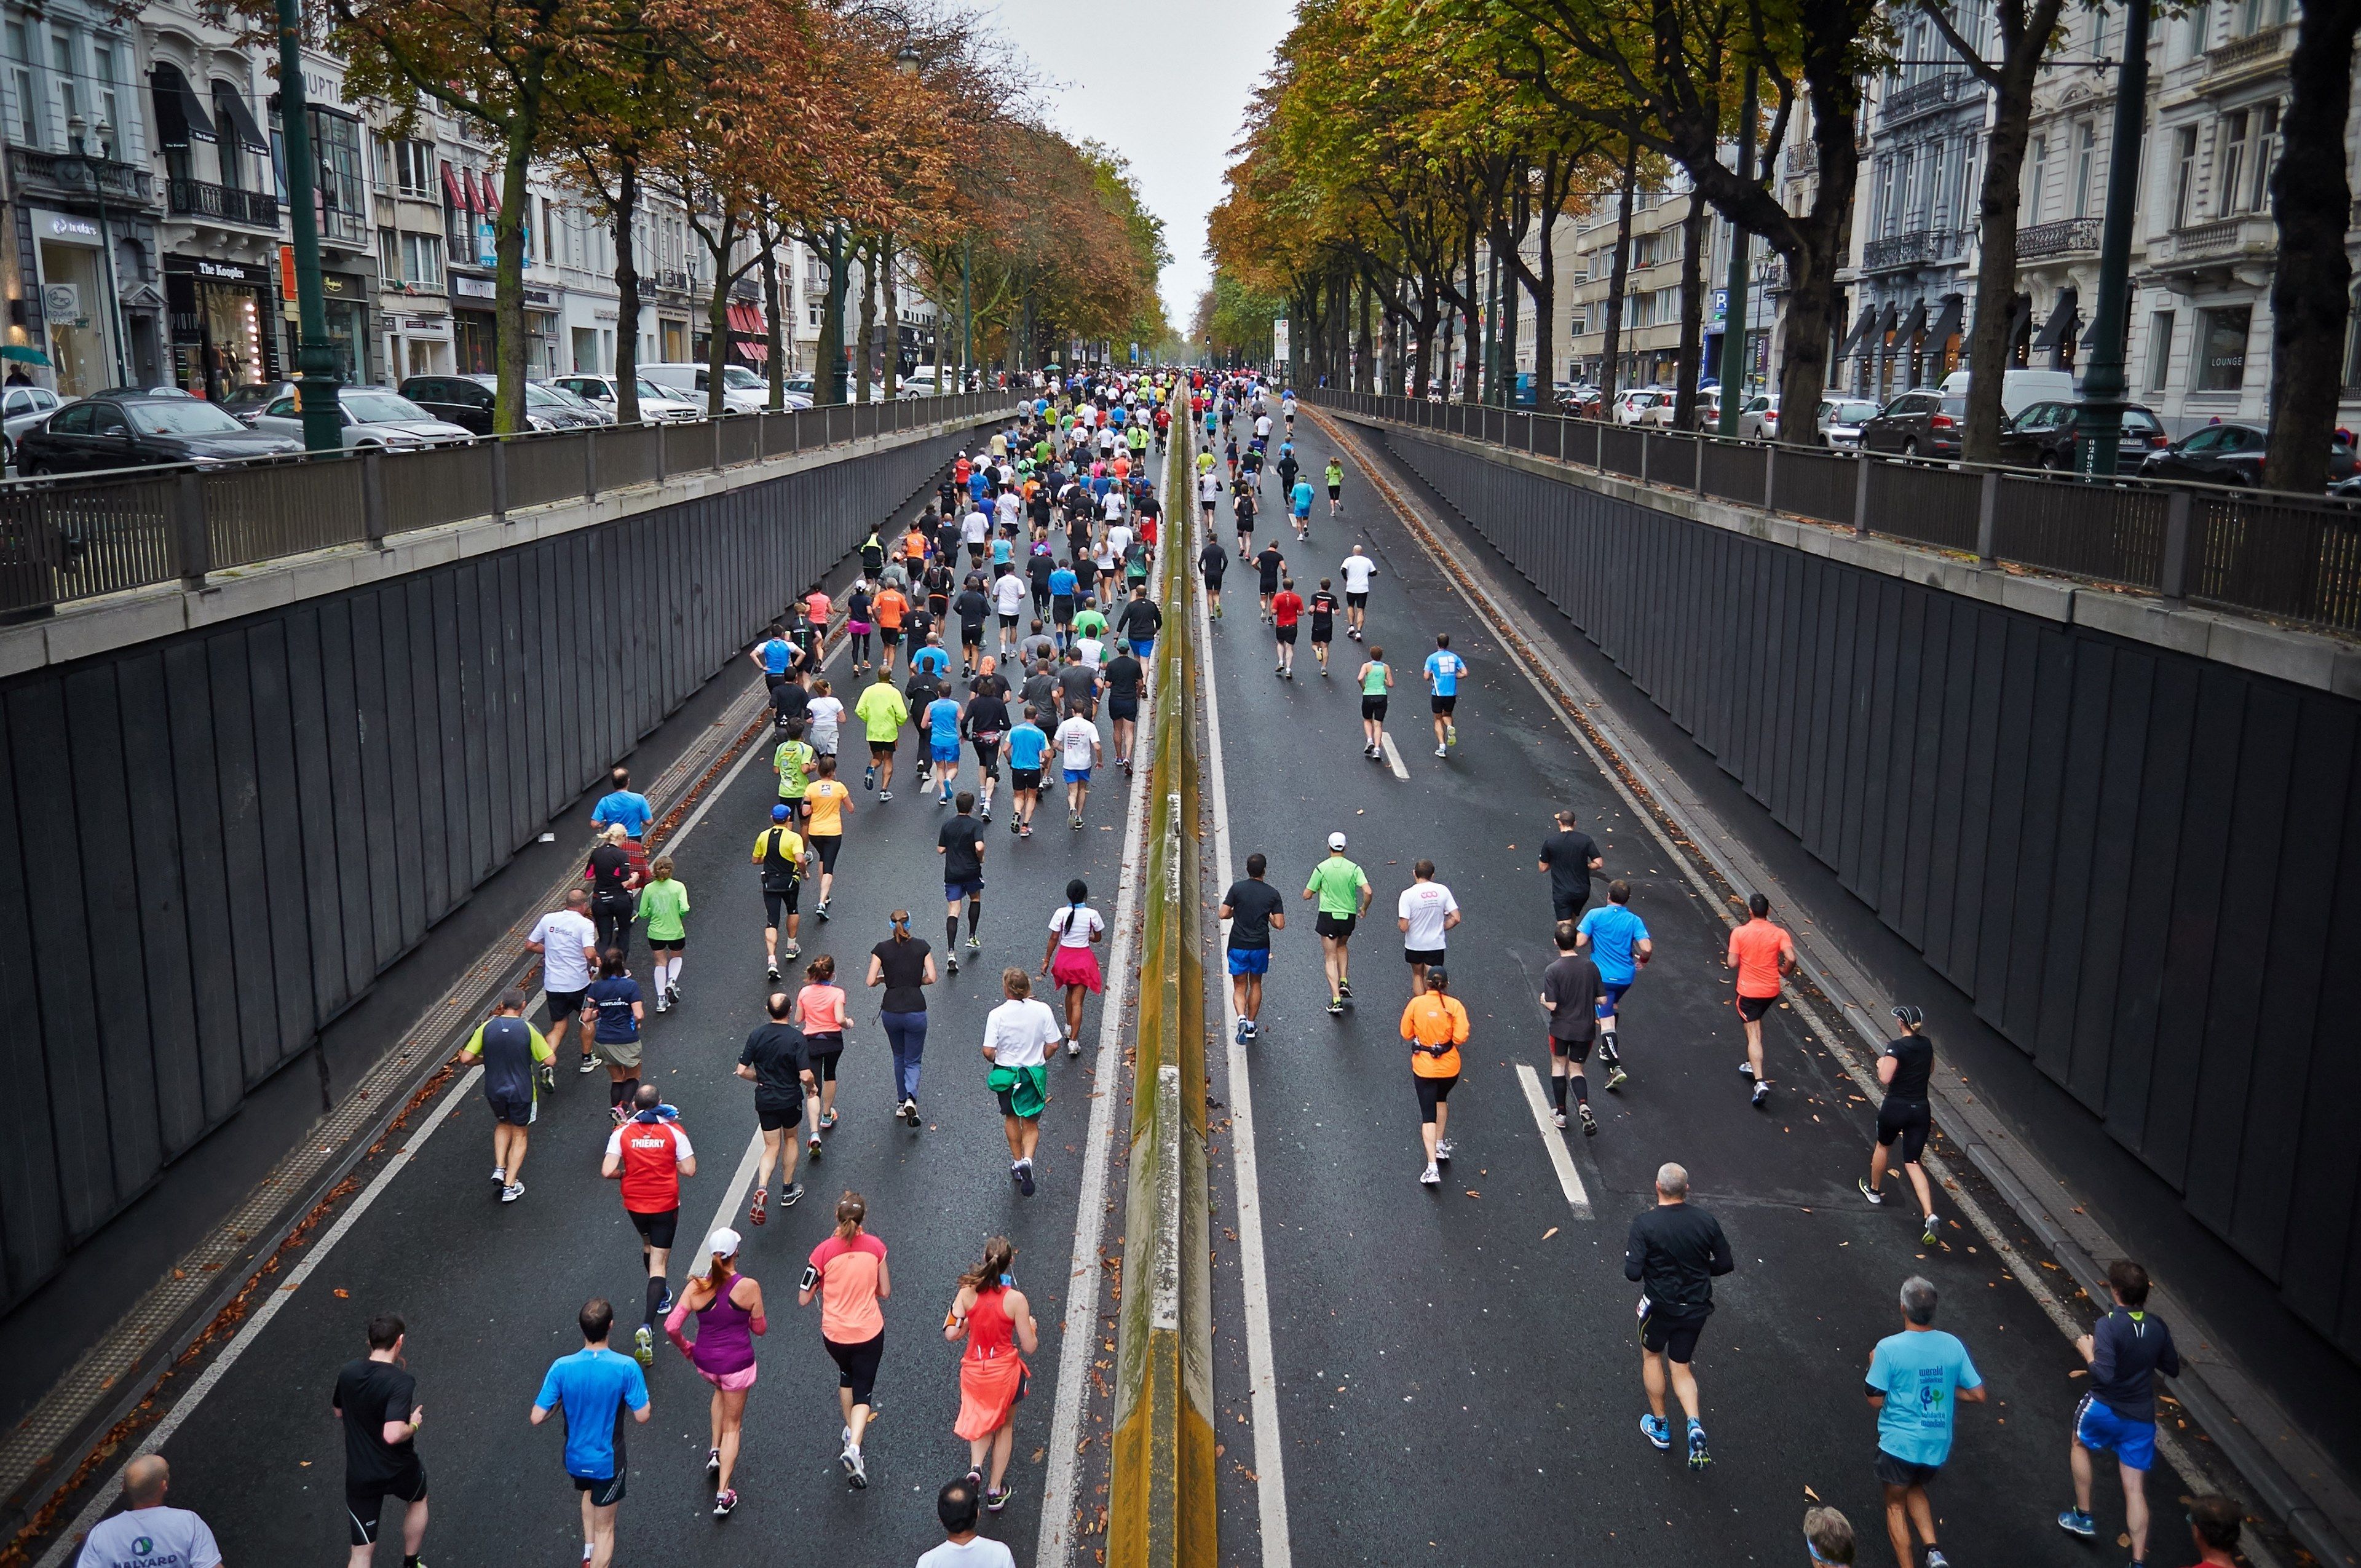 Wallpaper / a large group of people running in a